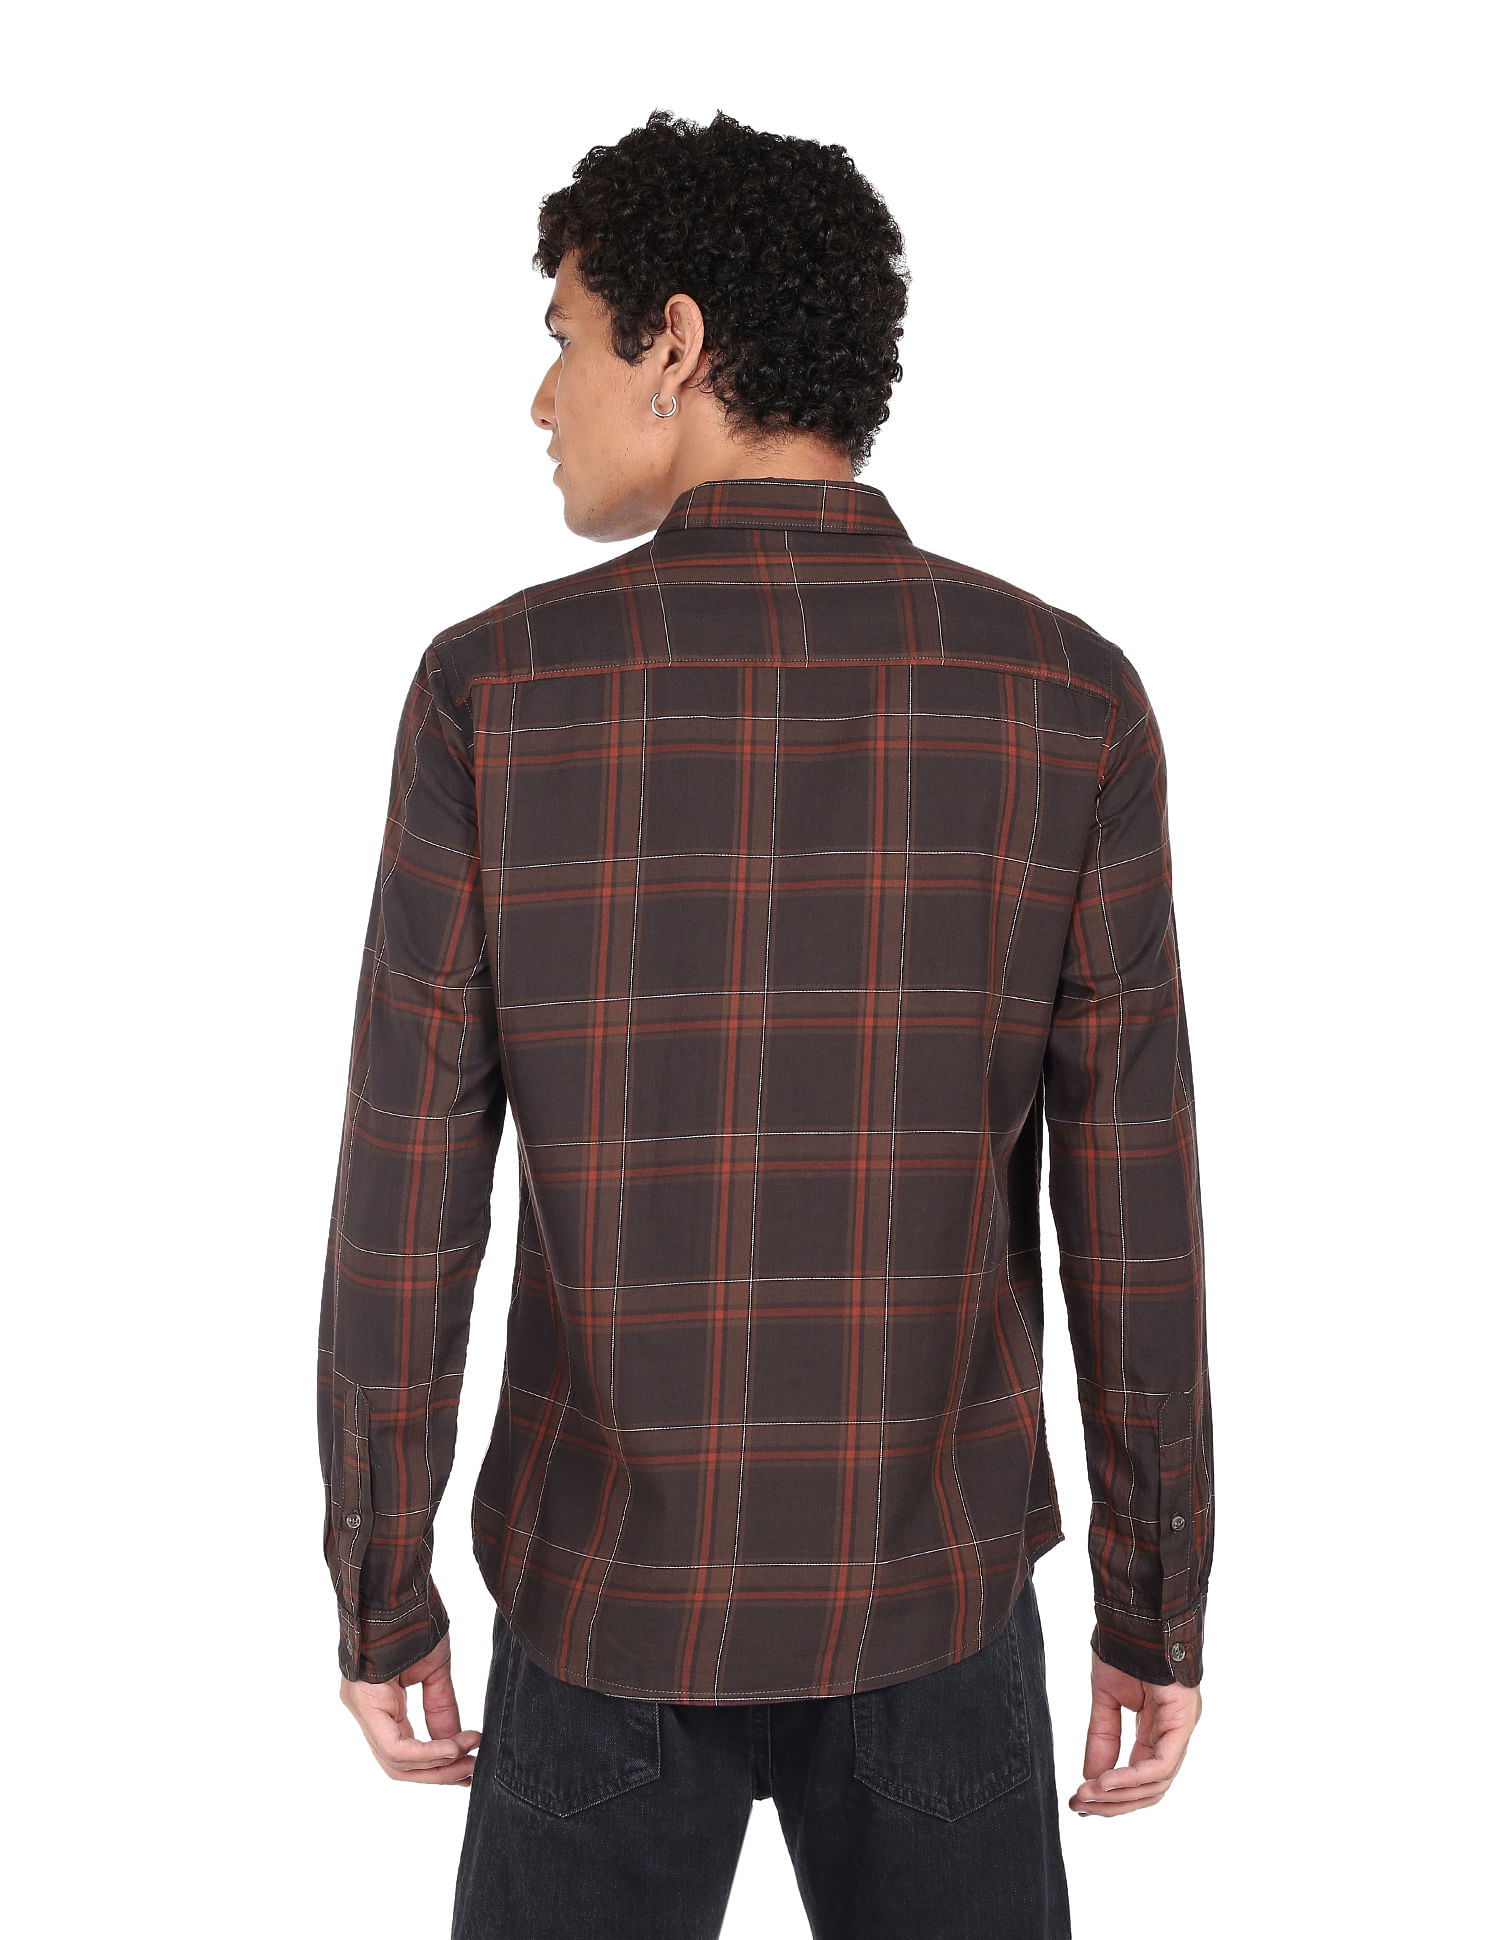 Andy Yarn Dyed Brushed Twill Check Shirt